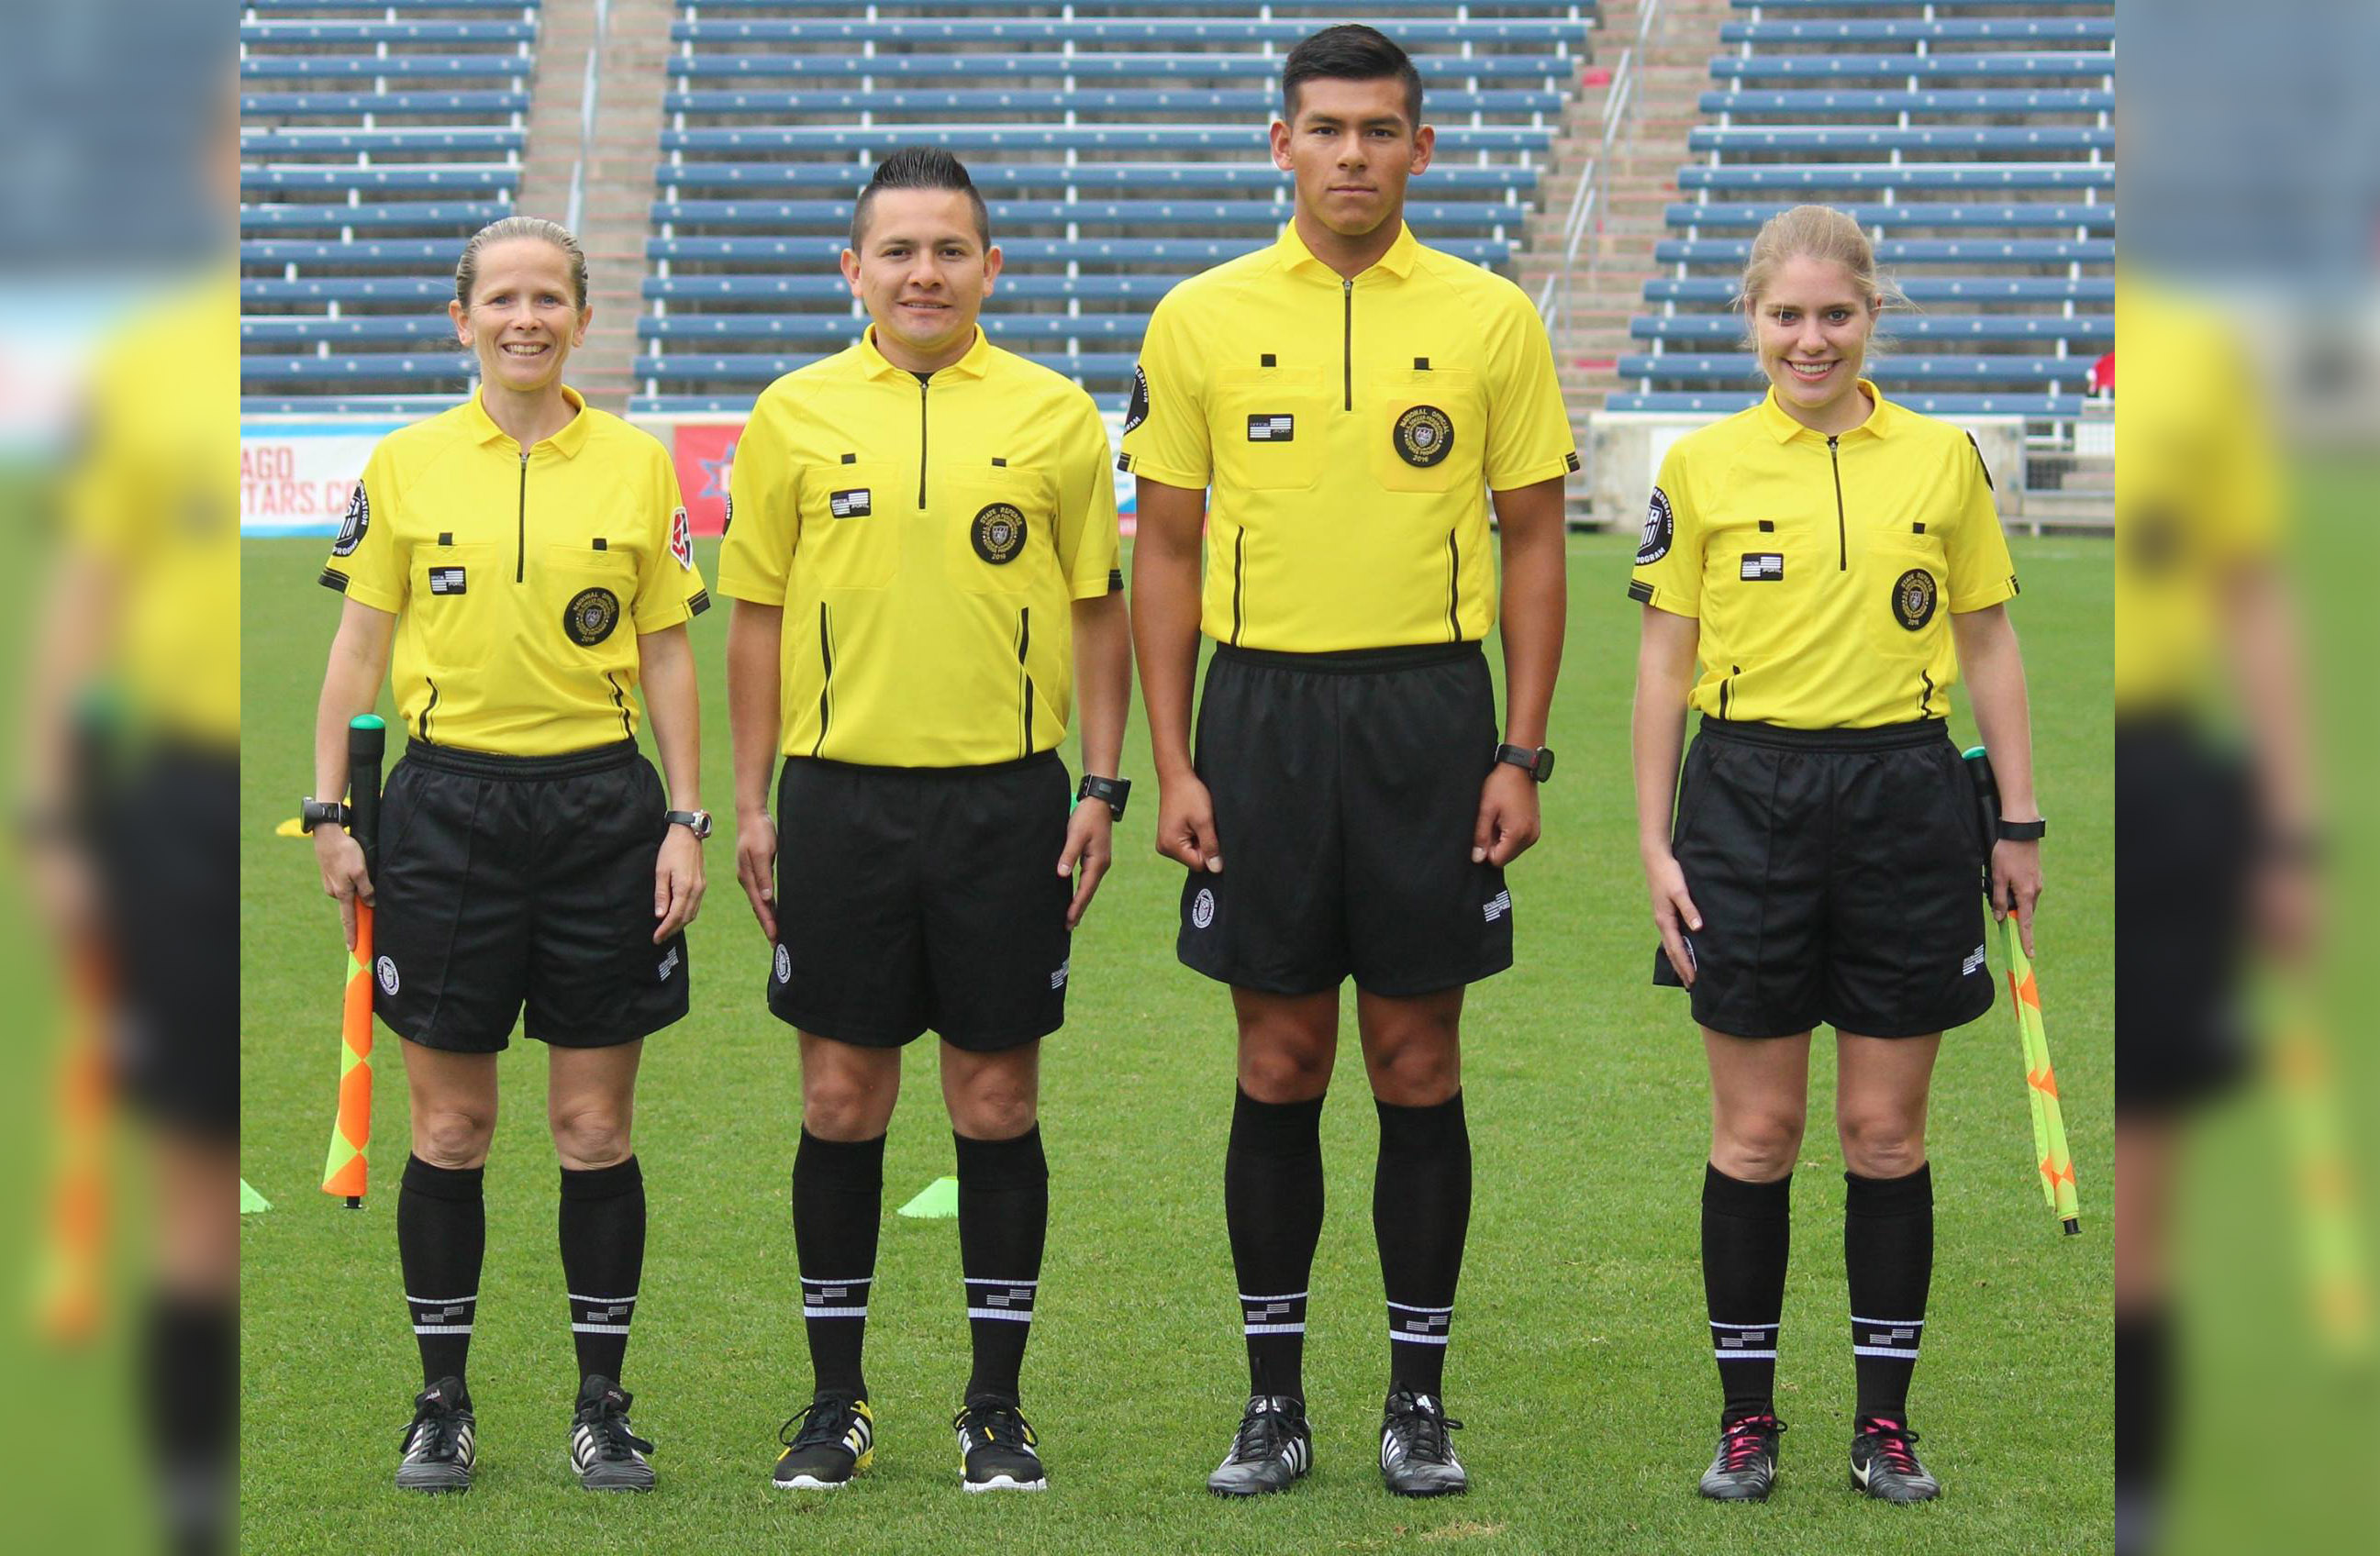 Referee Uniforms from Official Sports 